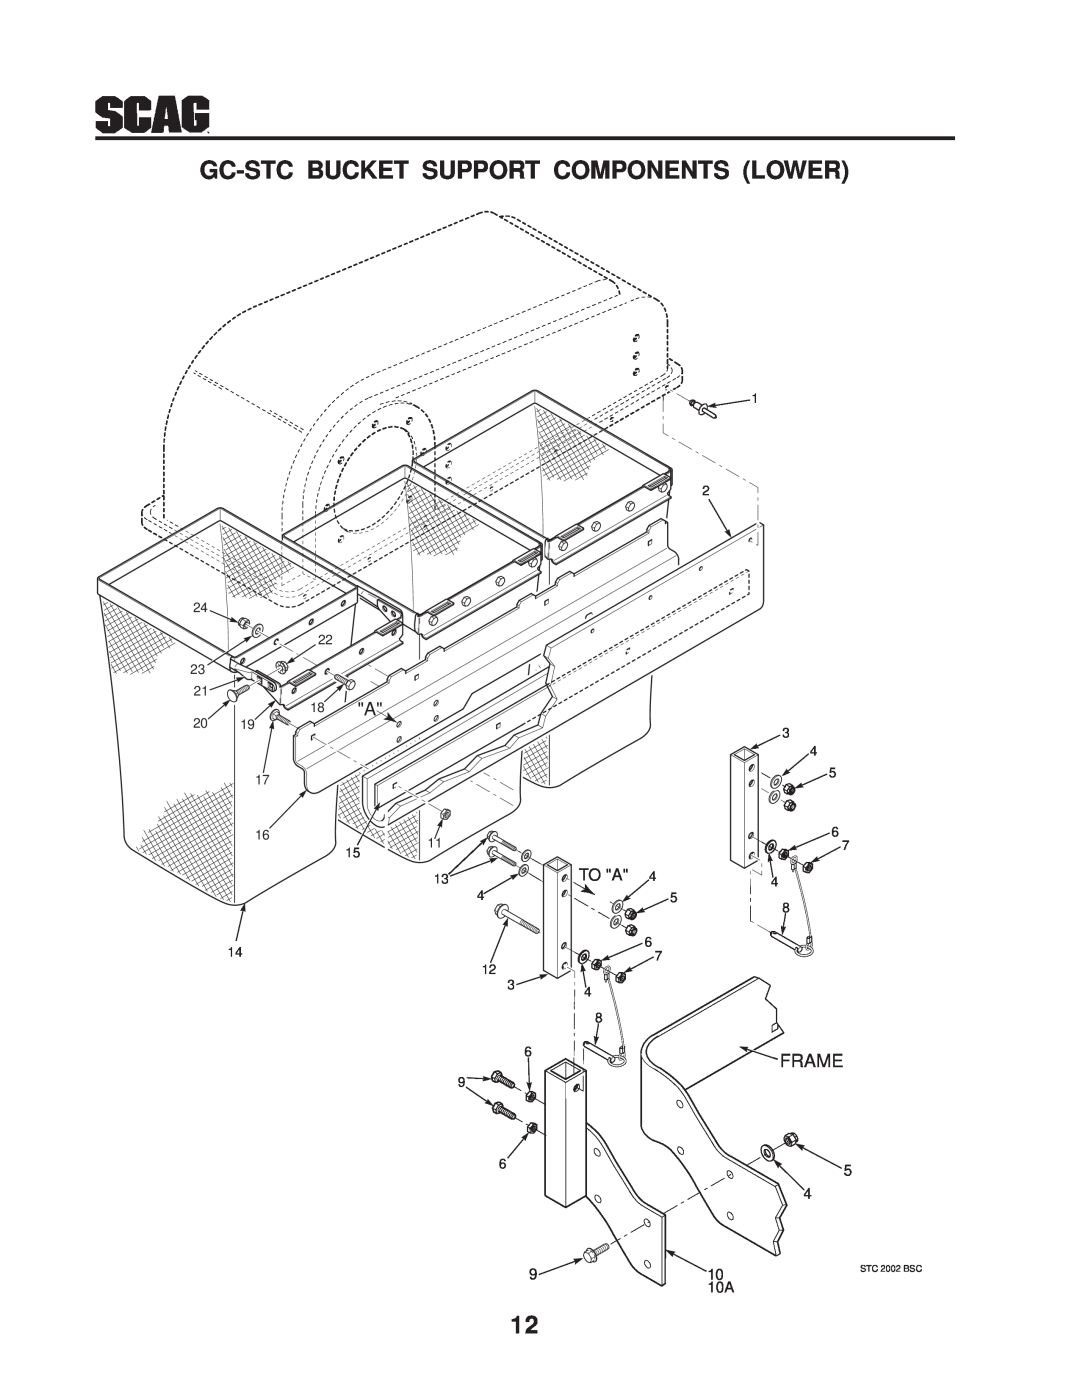 Scag Power Equipment GC-STC manual Gc-Stc Bucket Support Components Lower, Frame, STC 2002 BSC 